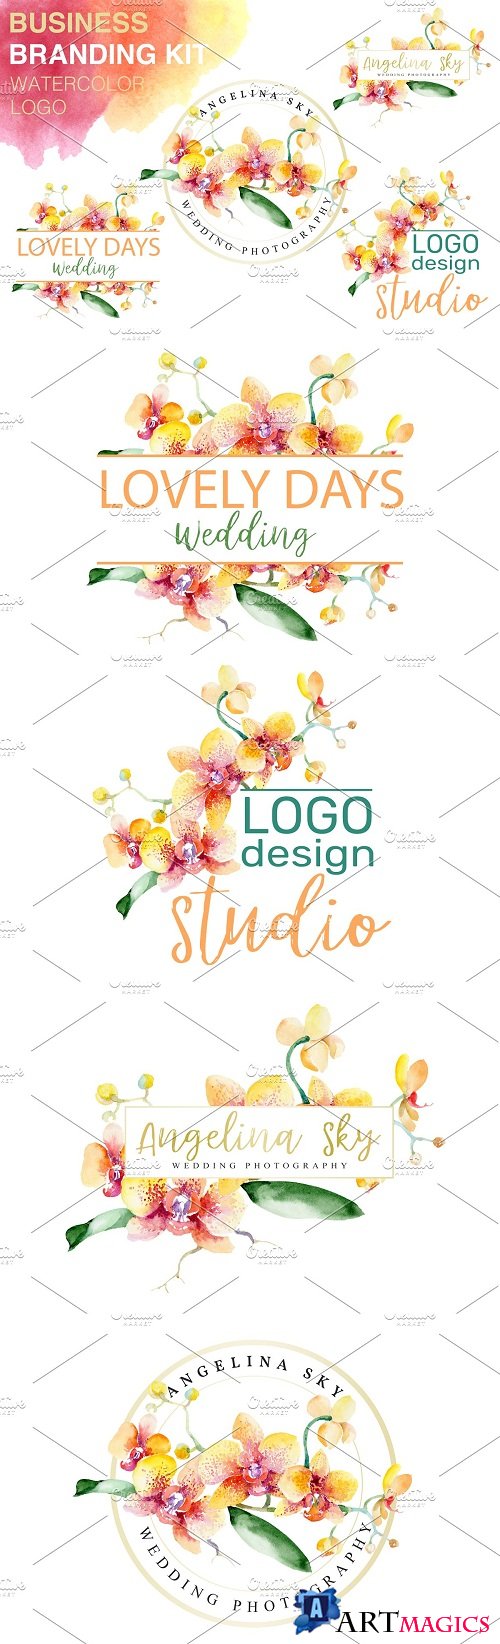 LOGO with beautiful orchids - 3736458